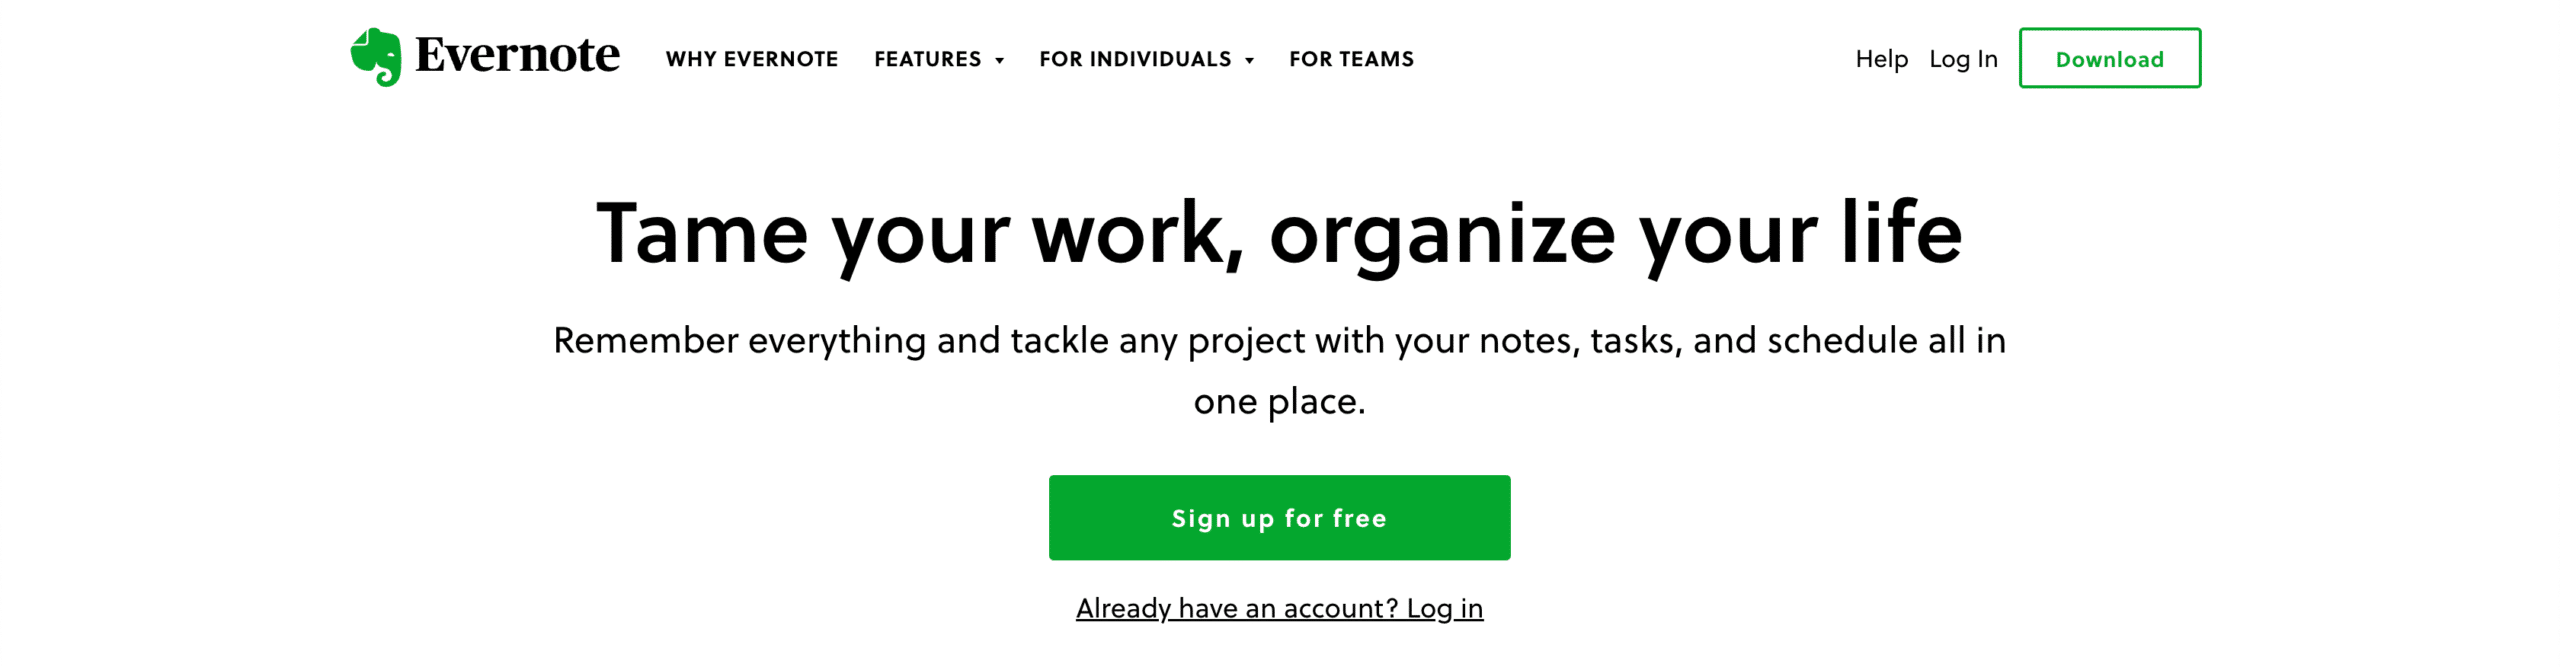 Evernote’s site provides an example of simple SaaS web design